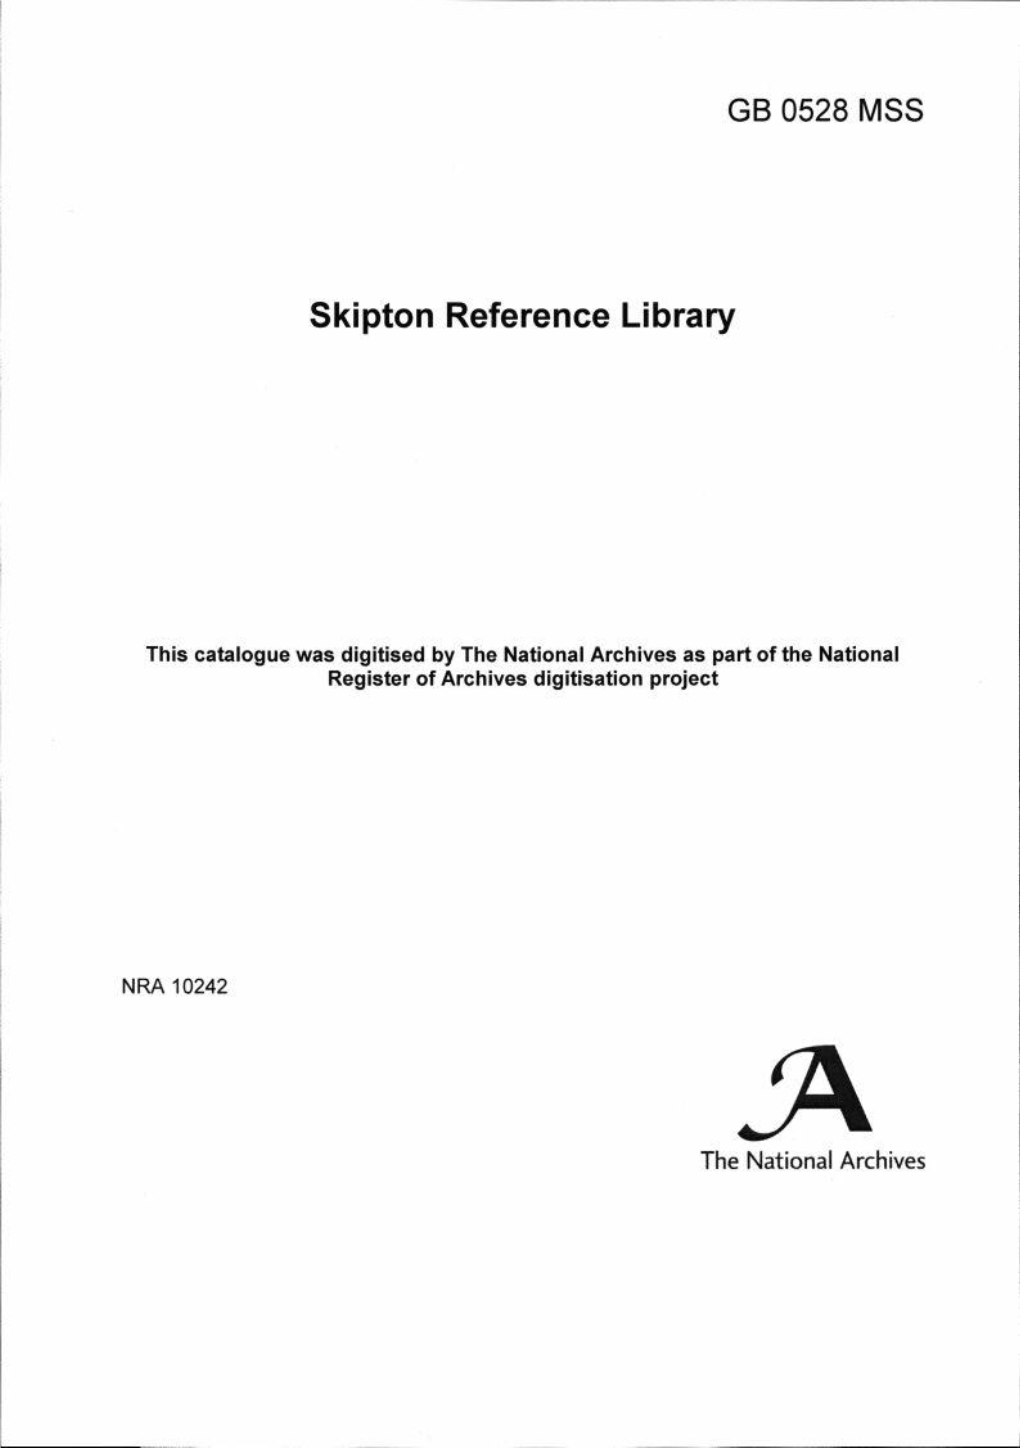 Skipton Reference Library